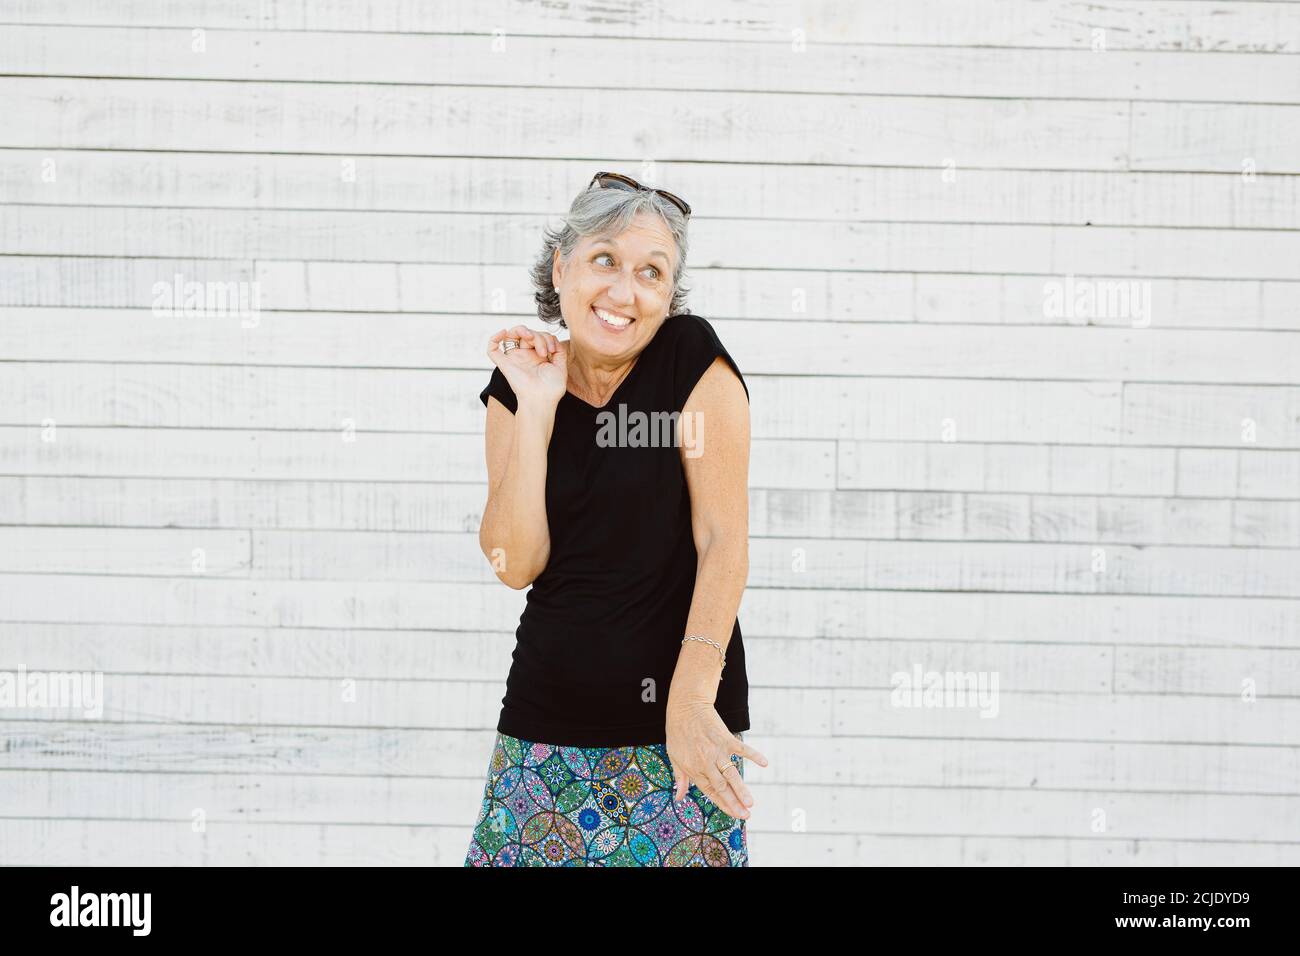 Senior woman making grimace over a white background Stock Photo